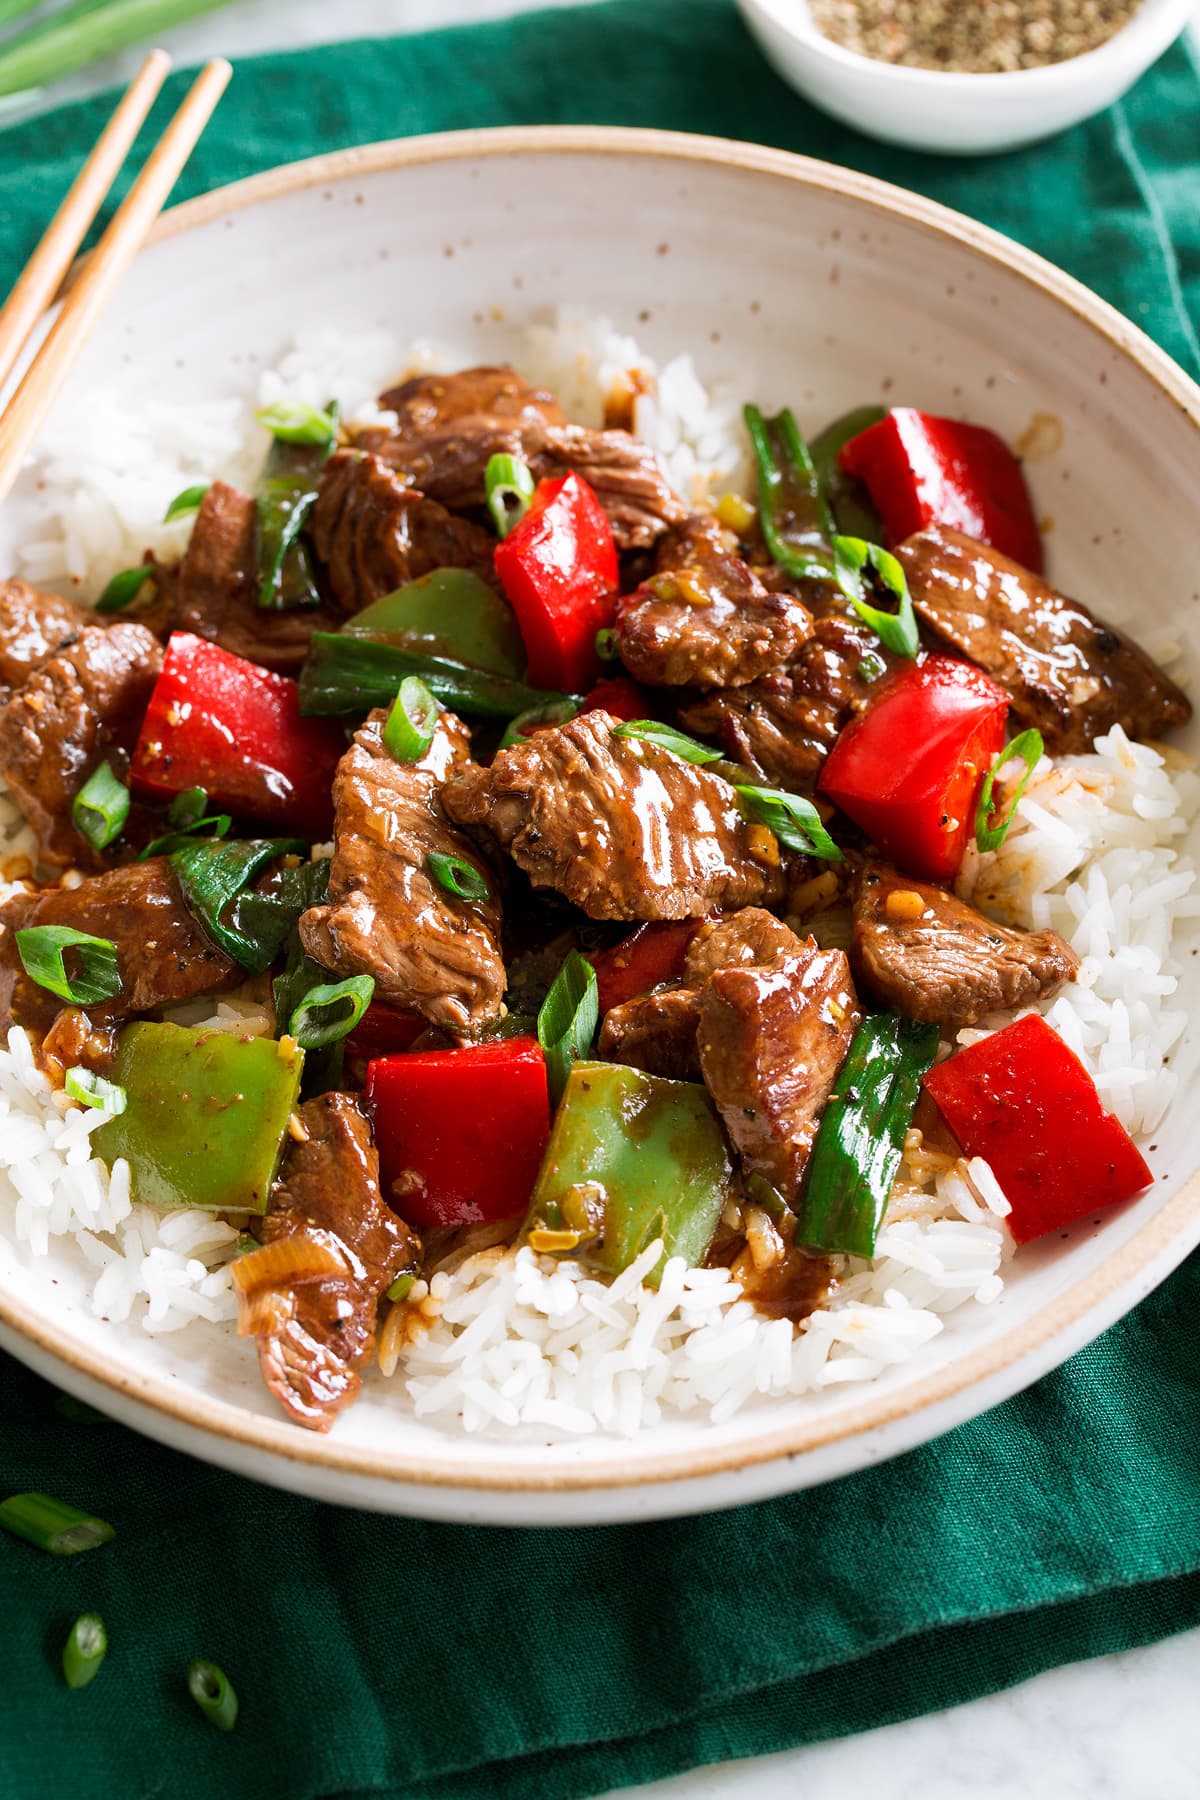 Photo: Pepper Steak in a bowl over white rice. Bowl is resting on a dark green cloth over a marble surface.